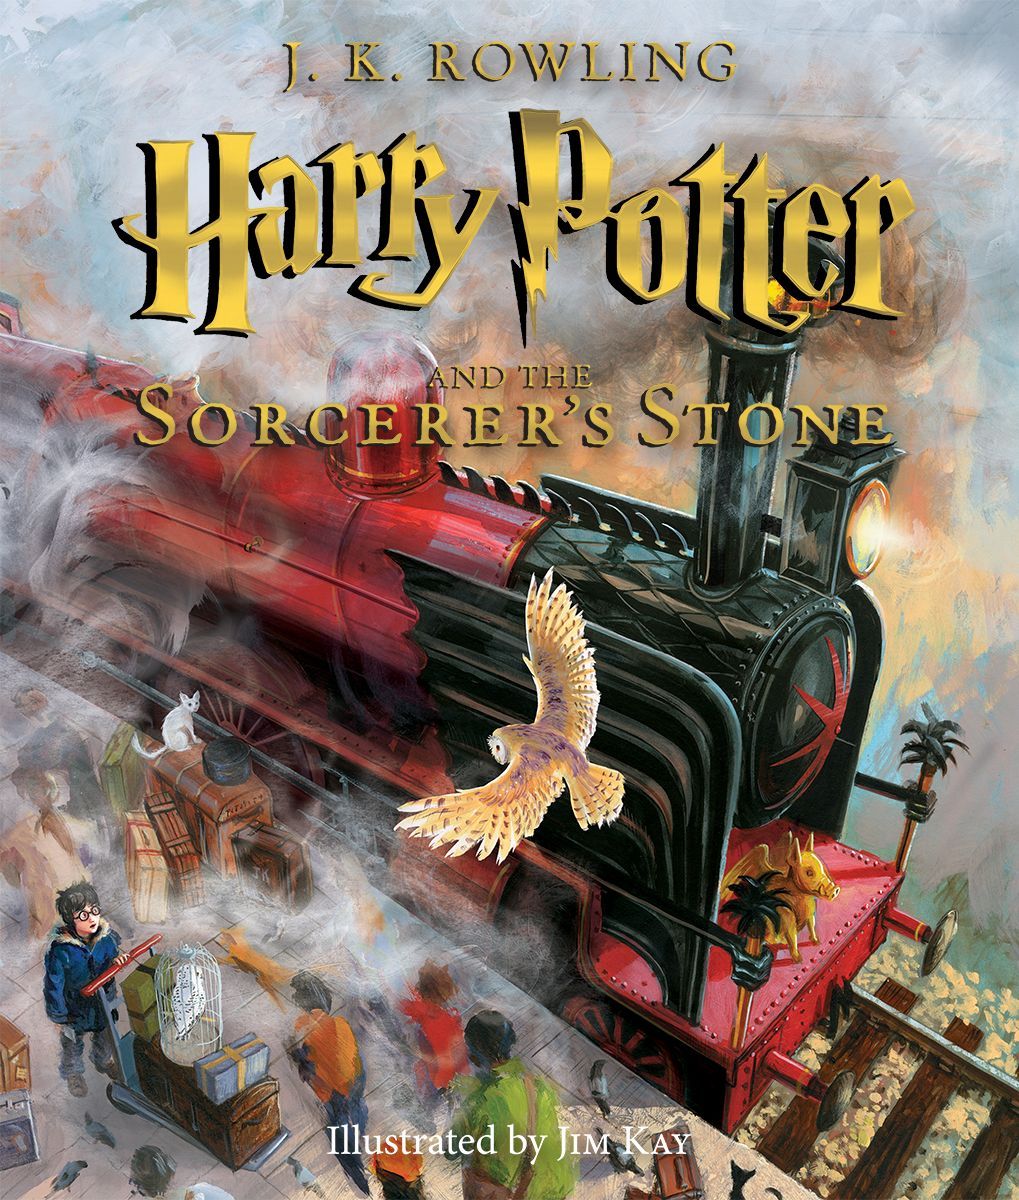 These New Image From the Illustrated Edition of Harry Potter Are Absolutely Magical